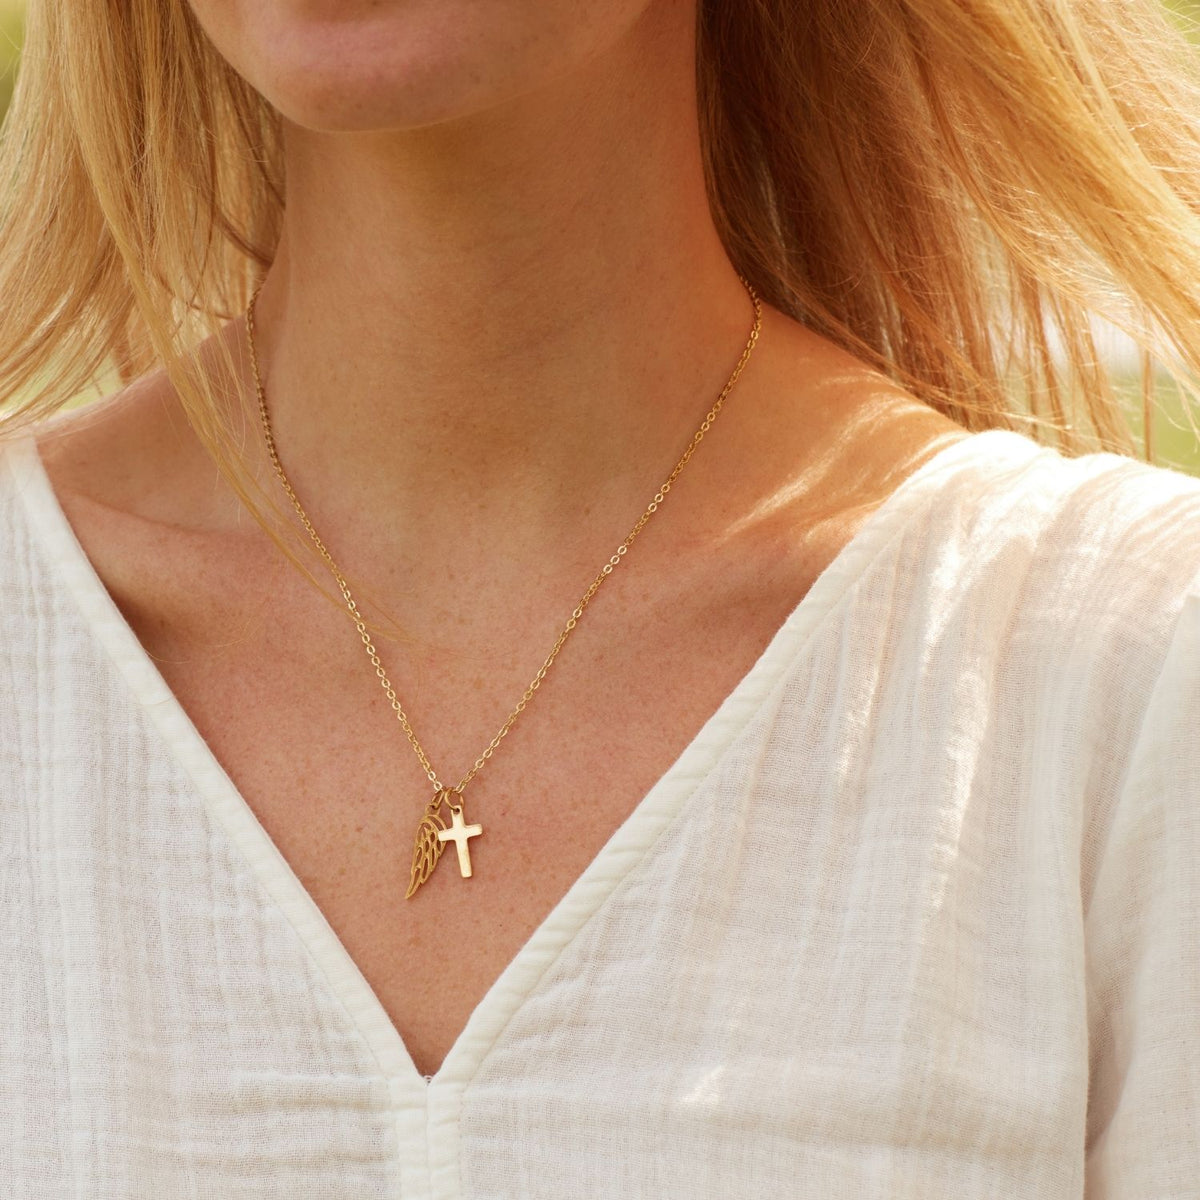 Gift for Cancer Inspiration | You Are Strong | Cross Necklace